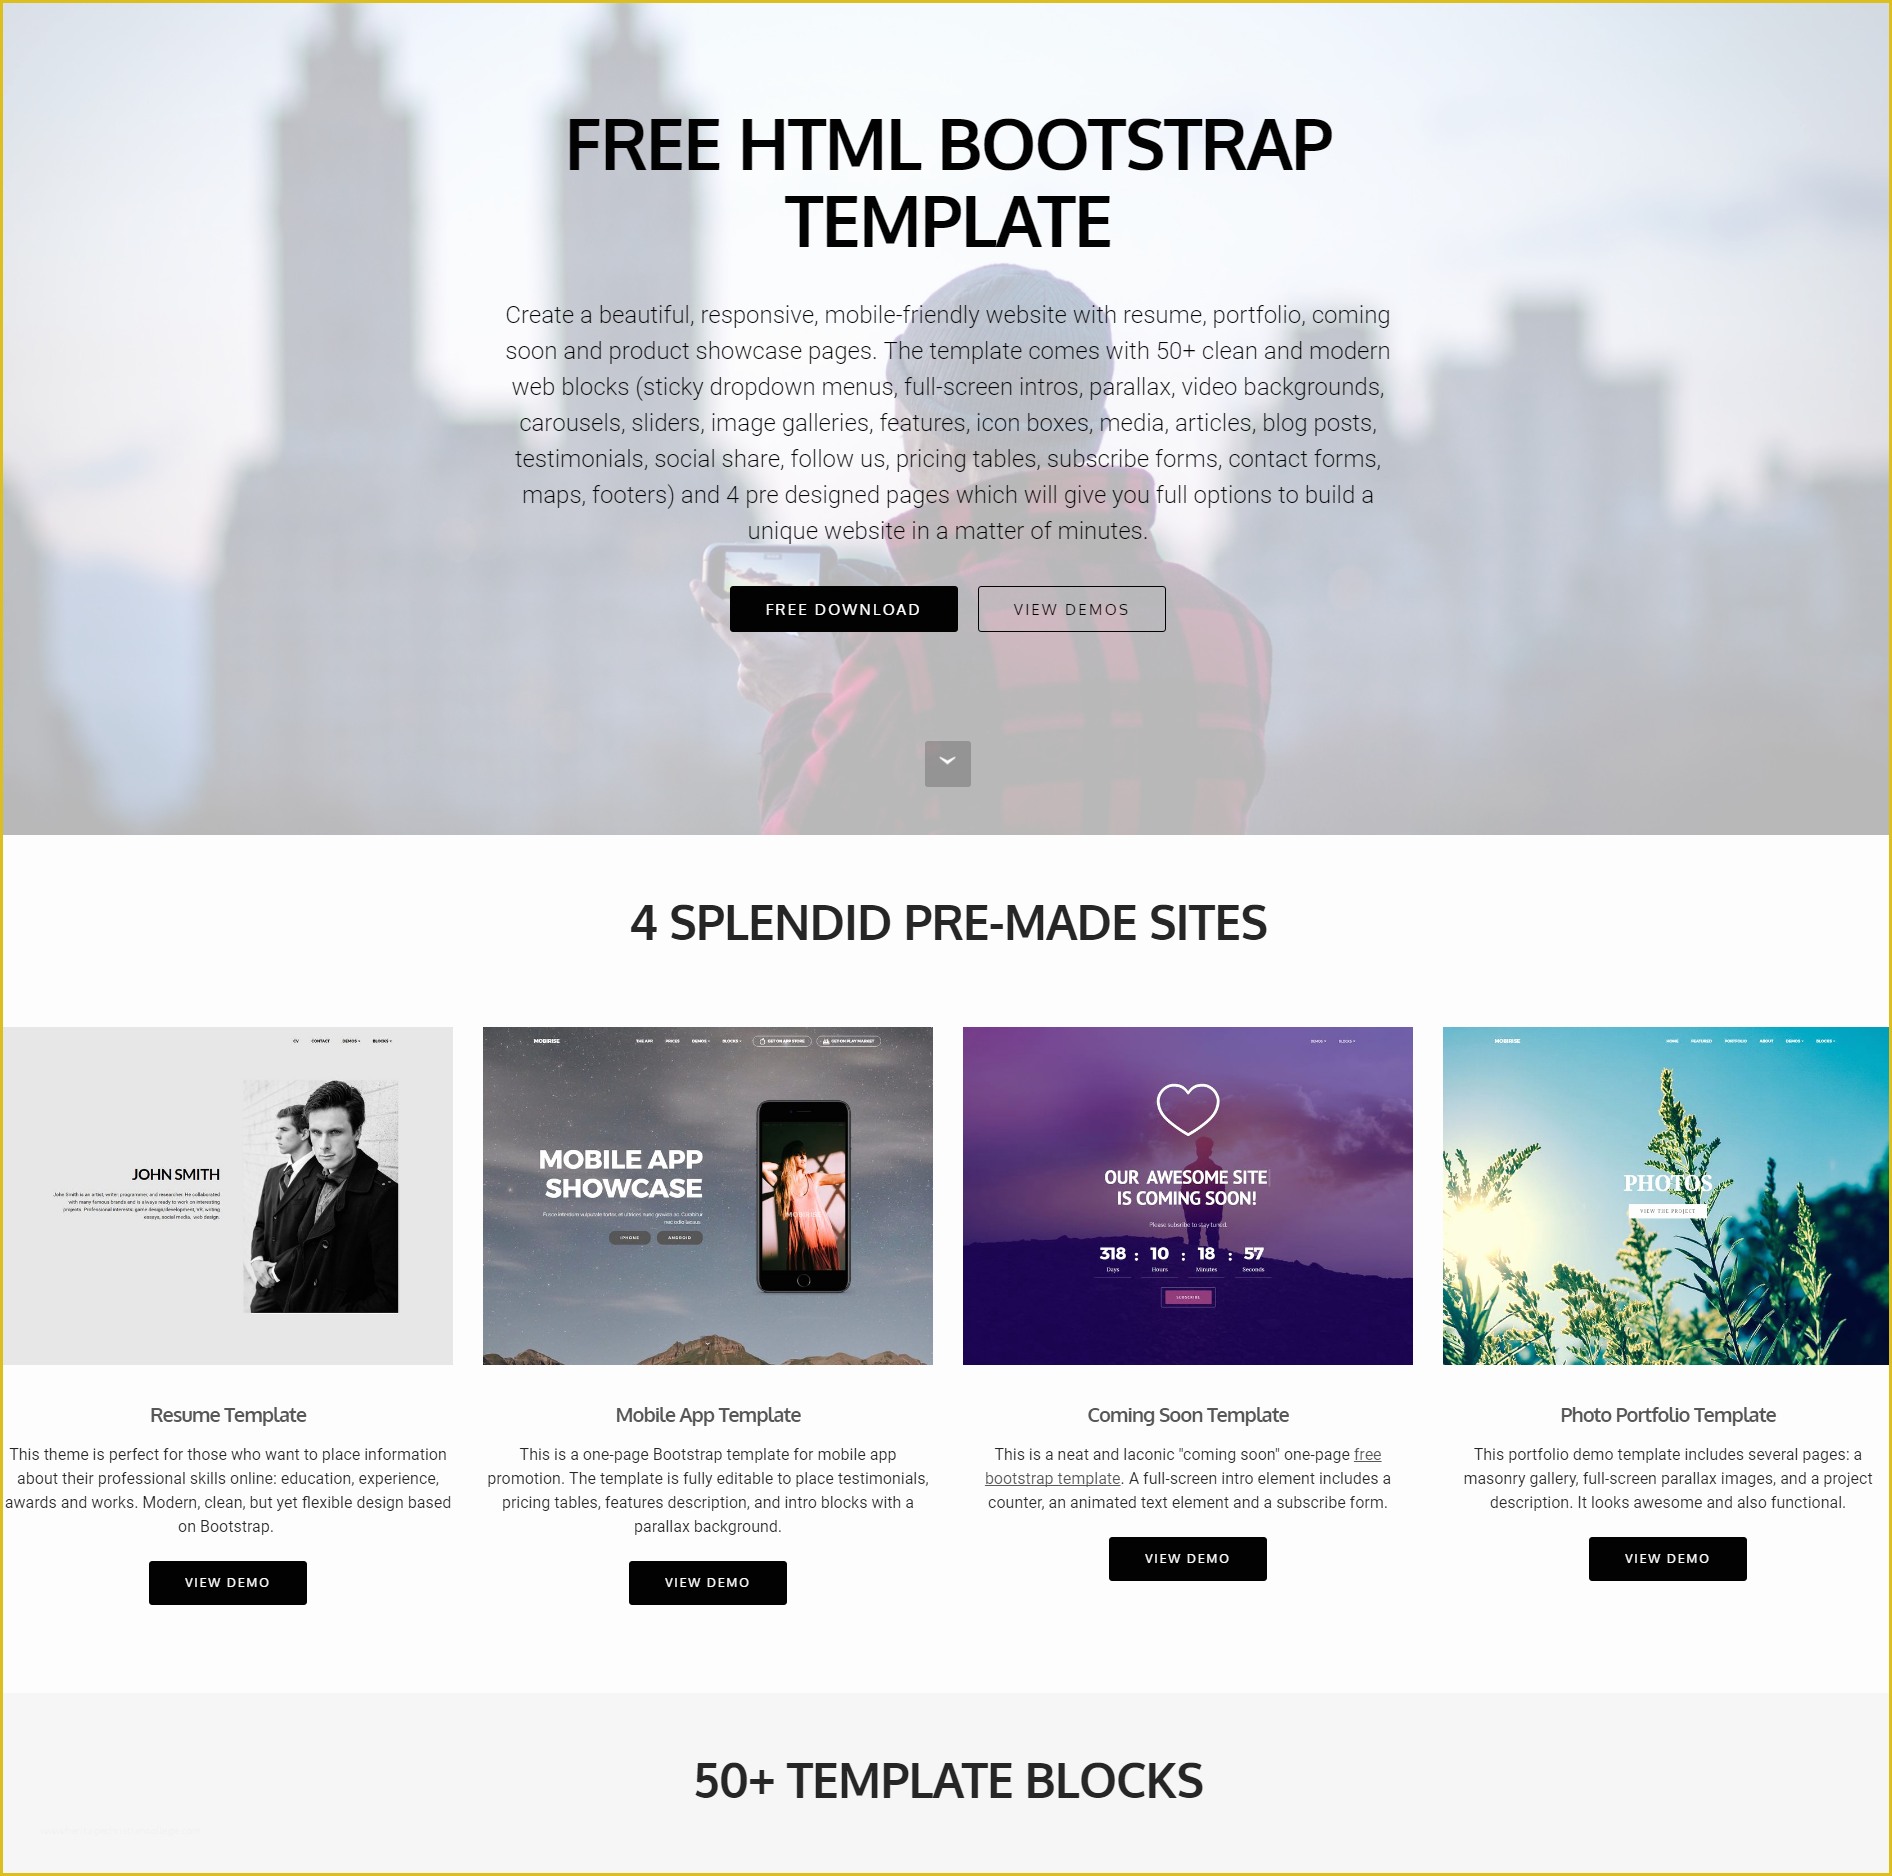 Free Web Templates Of 39 Brand New Free HTML Bootstrap Templates 2019